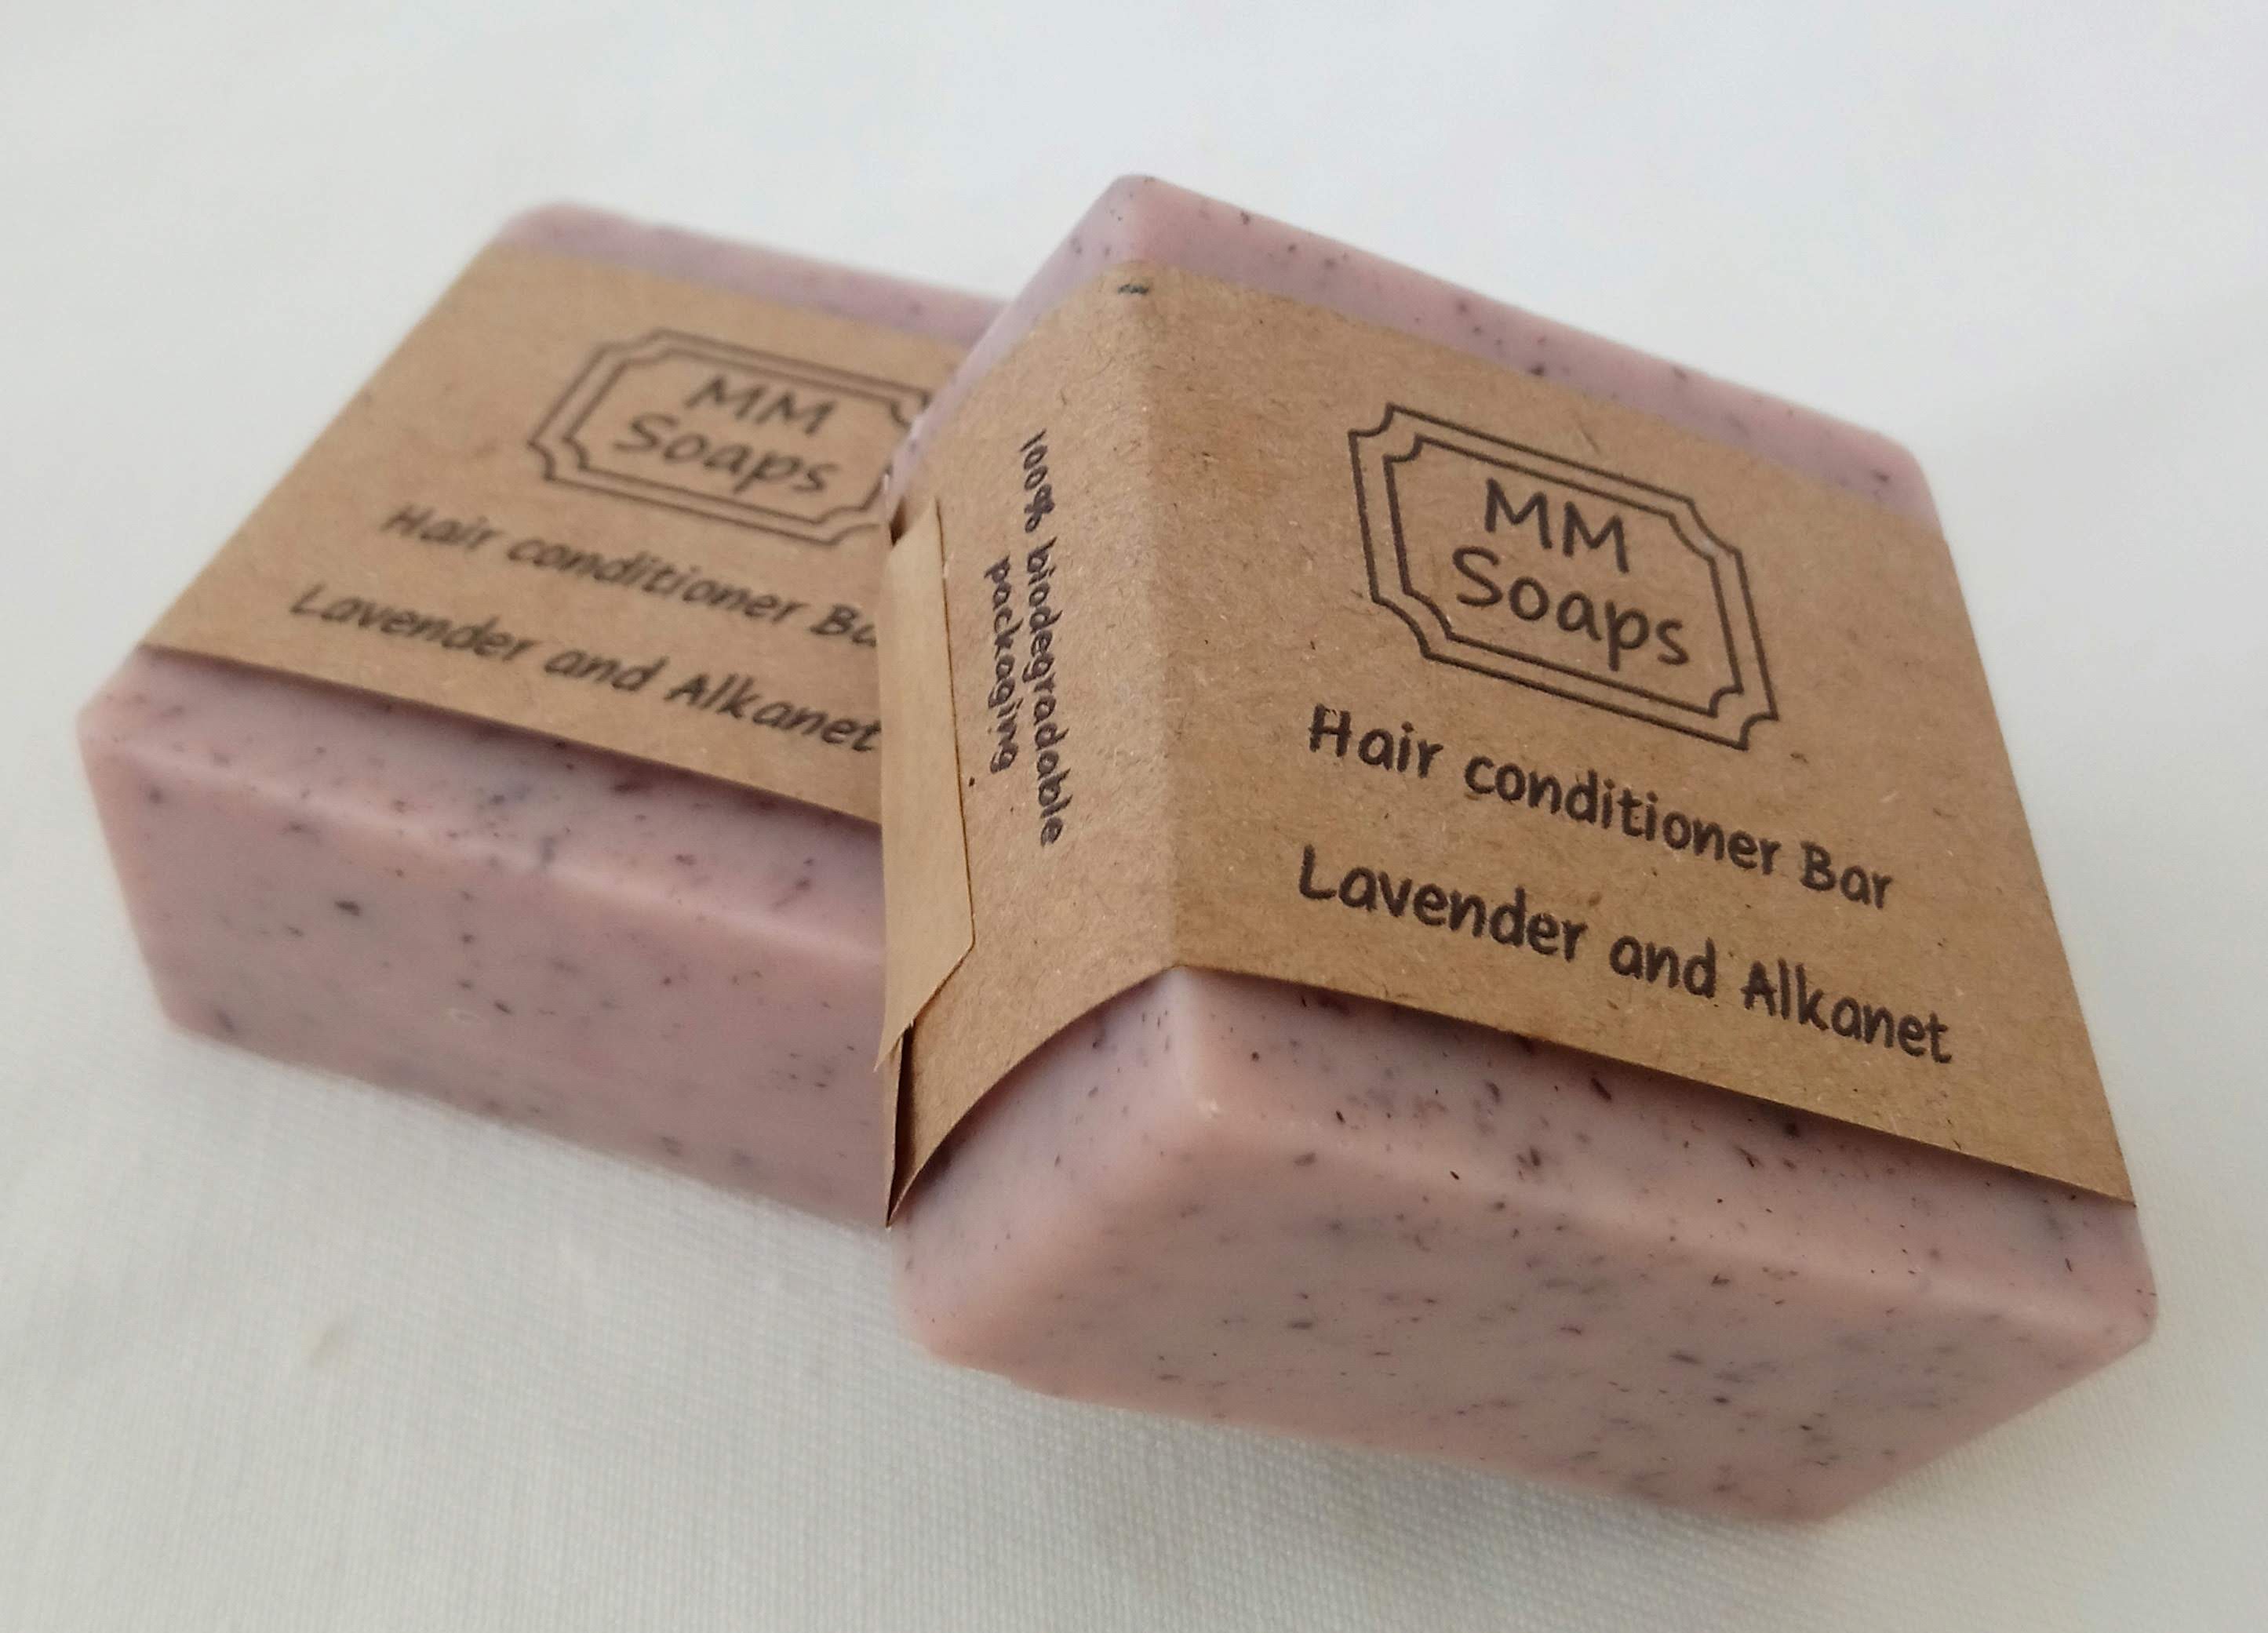 Lavender and Alkanet Conditioner Bar